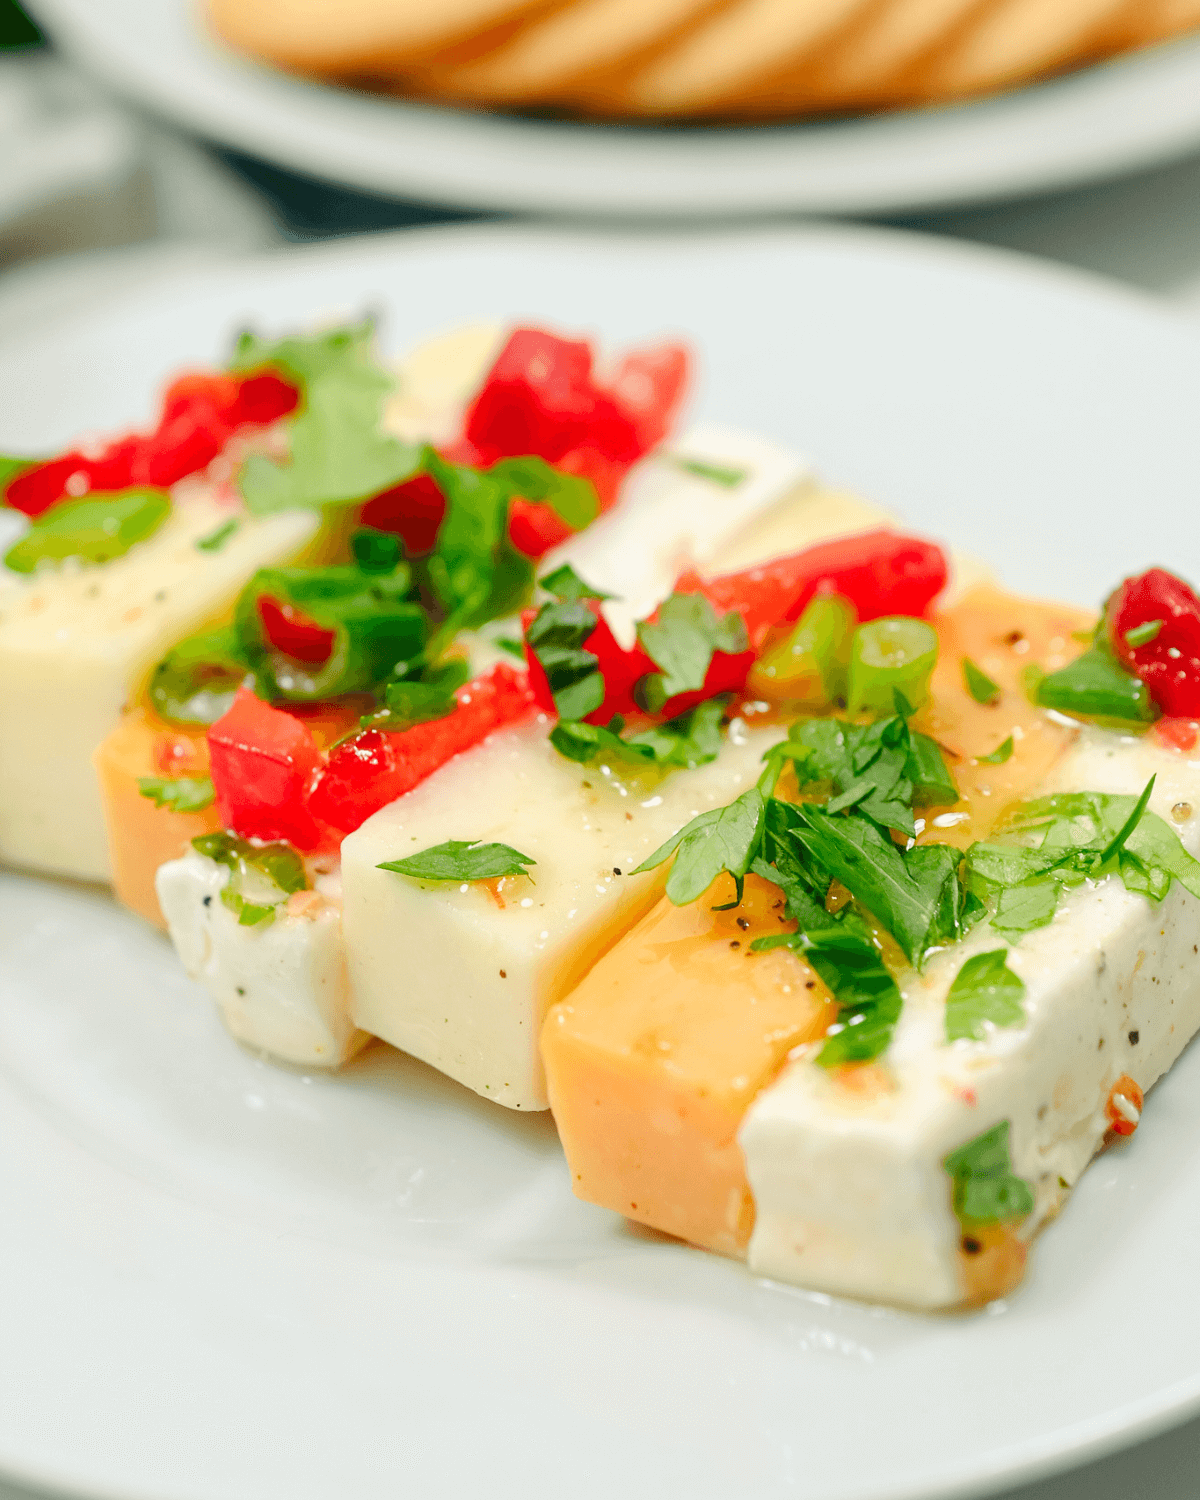 A plate of marinated cheese and vegetables on a white plate.